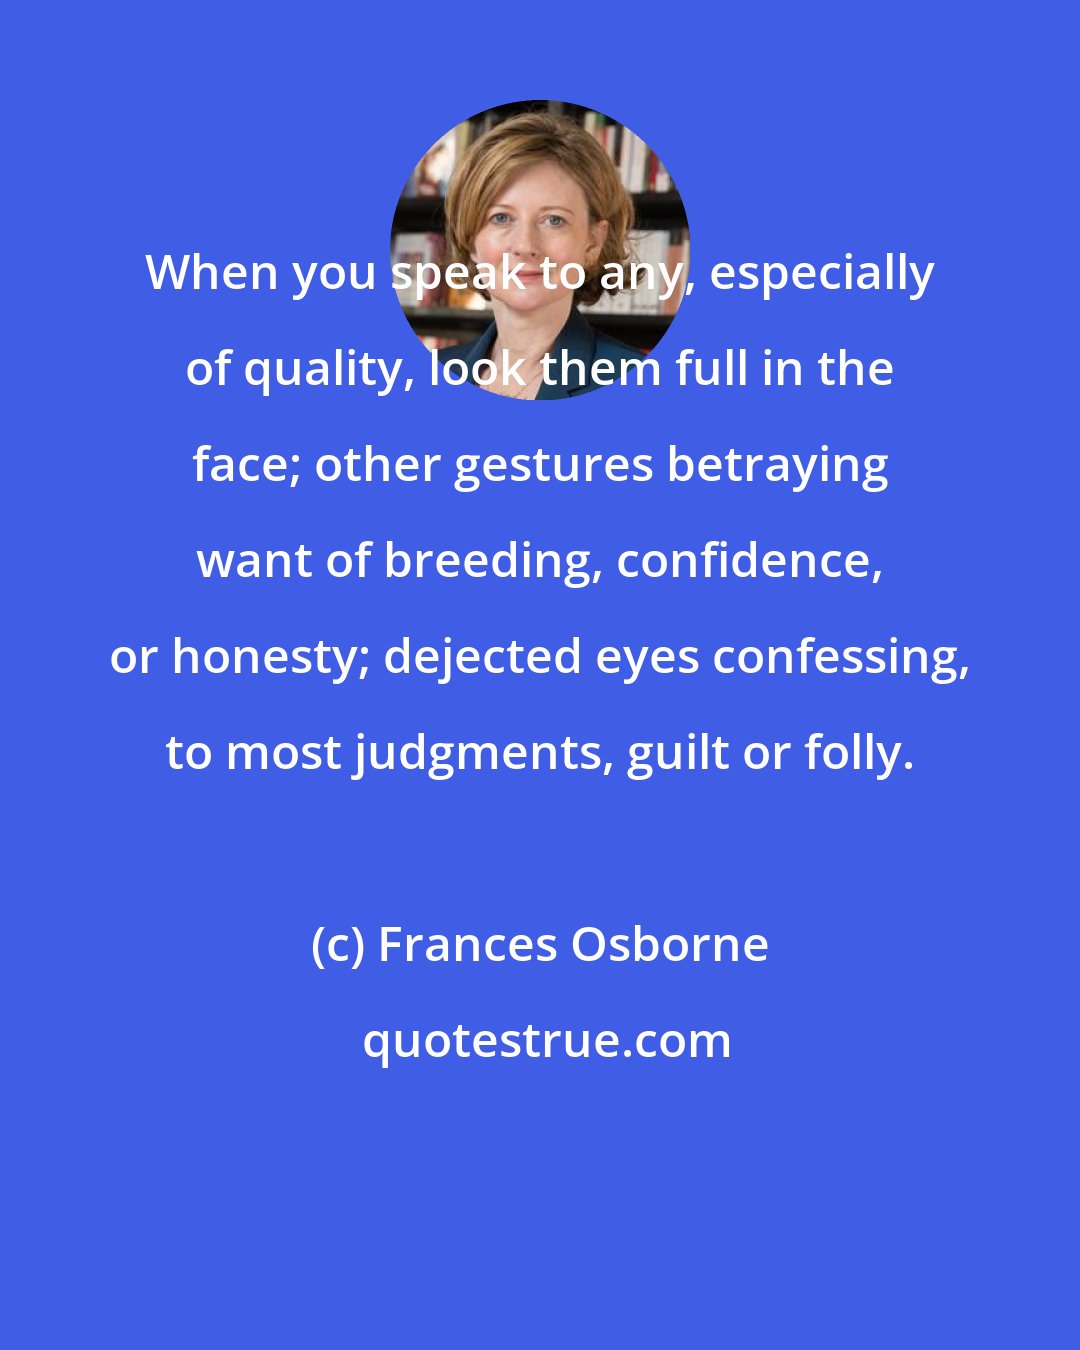 Frances Osborne: When you speak to any, especially of quality, look them full in the face; other gestures betraying want of breeding, confidence, or honesty; dejected eyes confessing, to most judgments, guilt or folly.